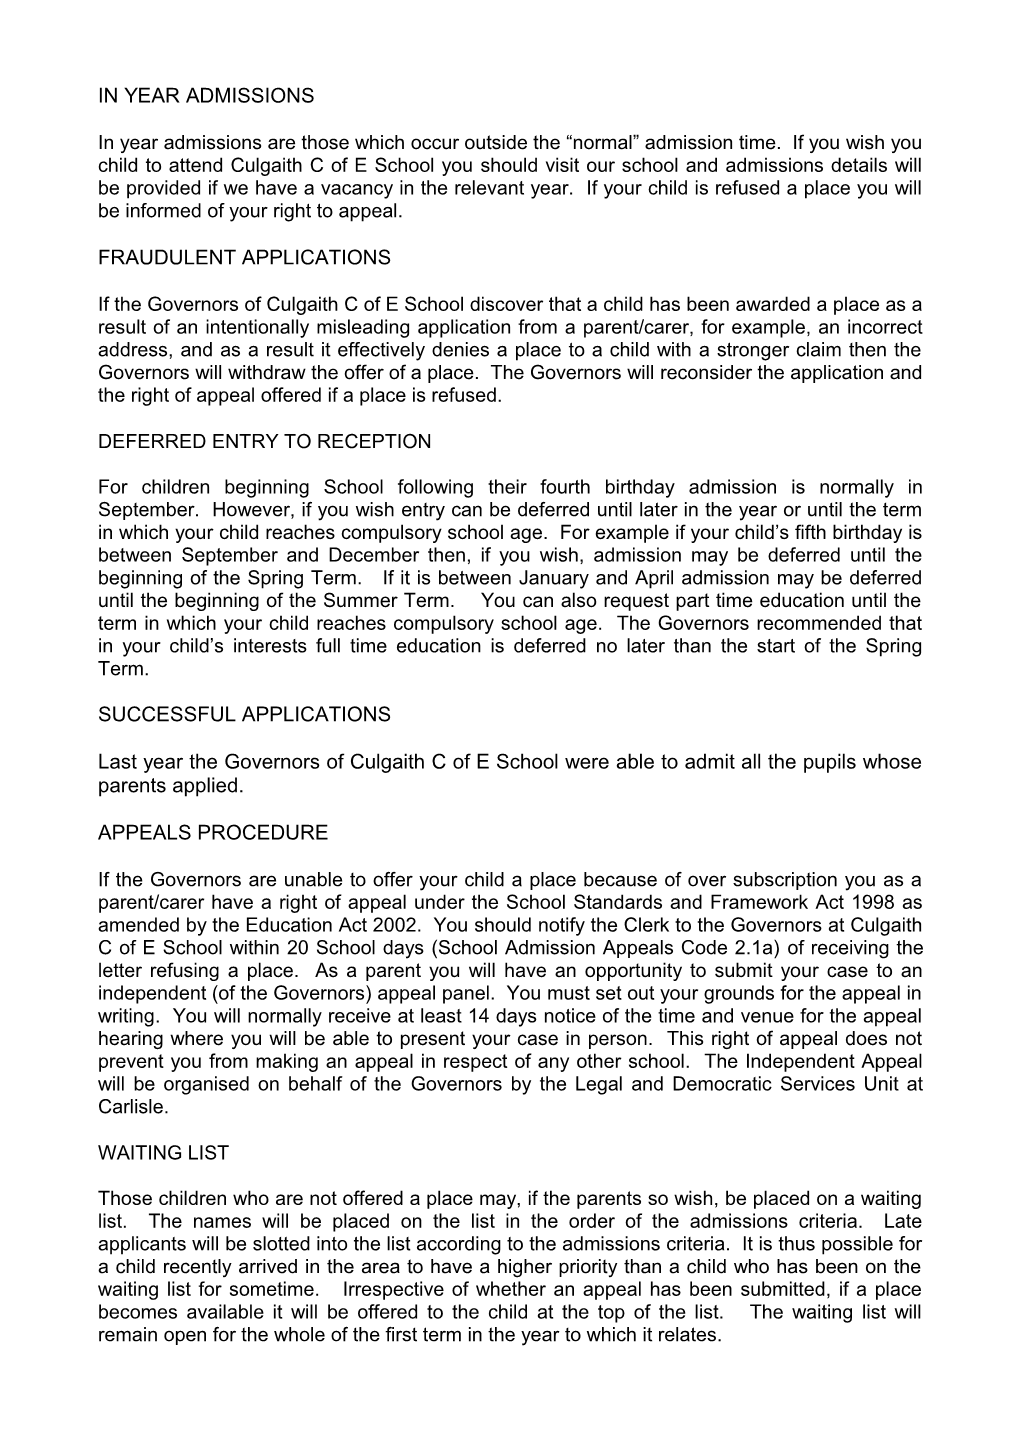 2013/14 Admissions Policy from Culgaith CE School for Consultation